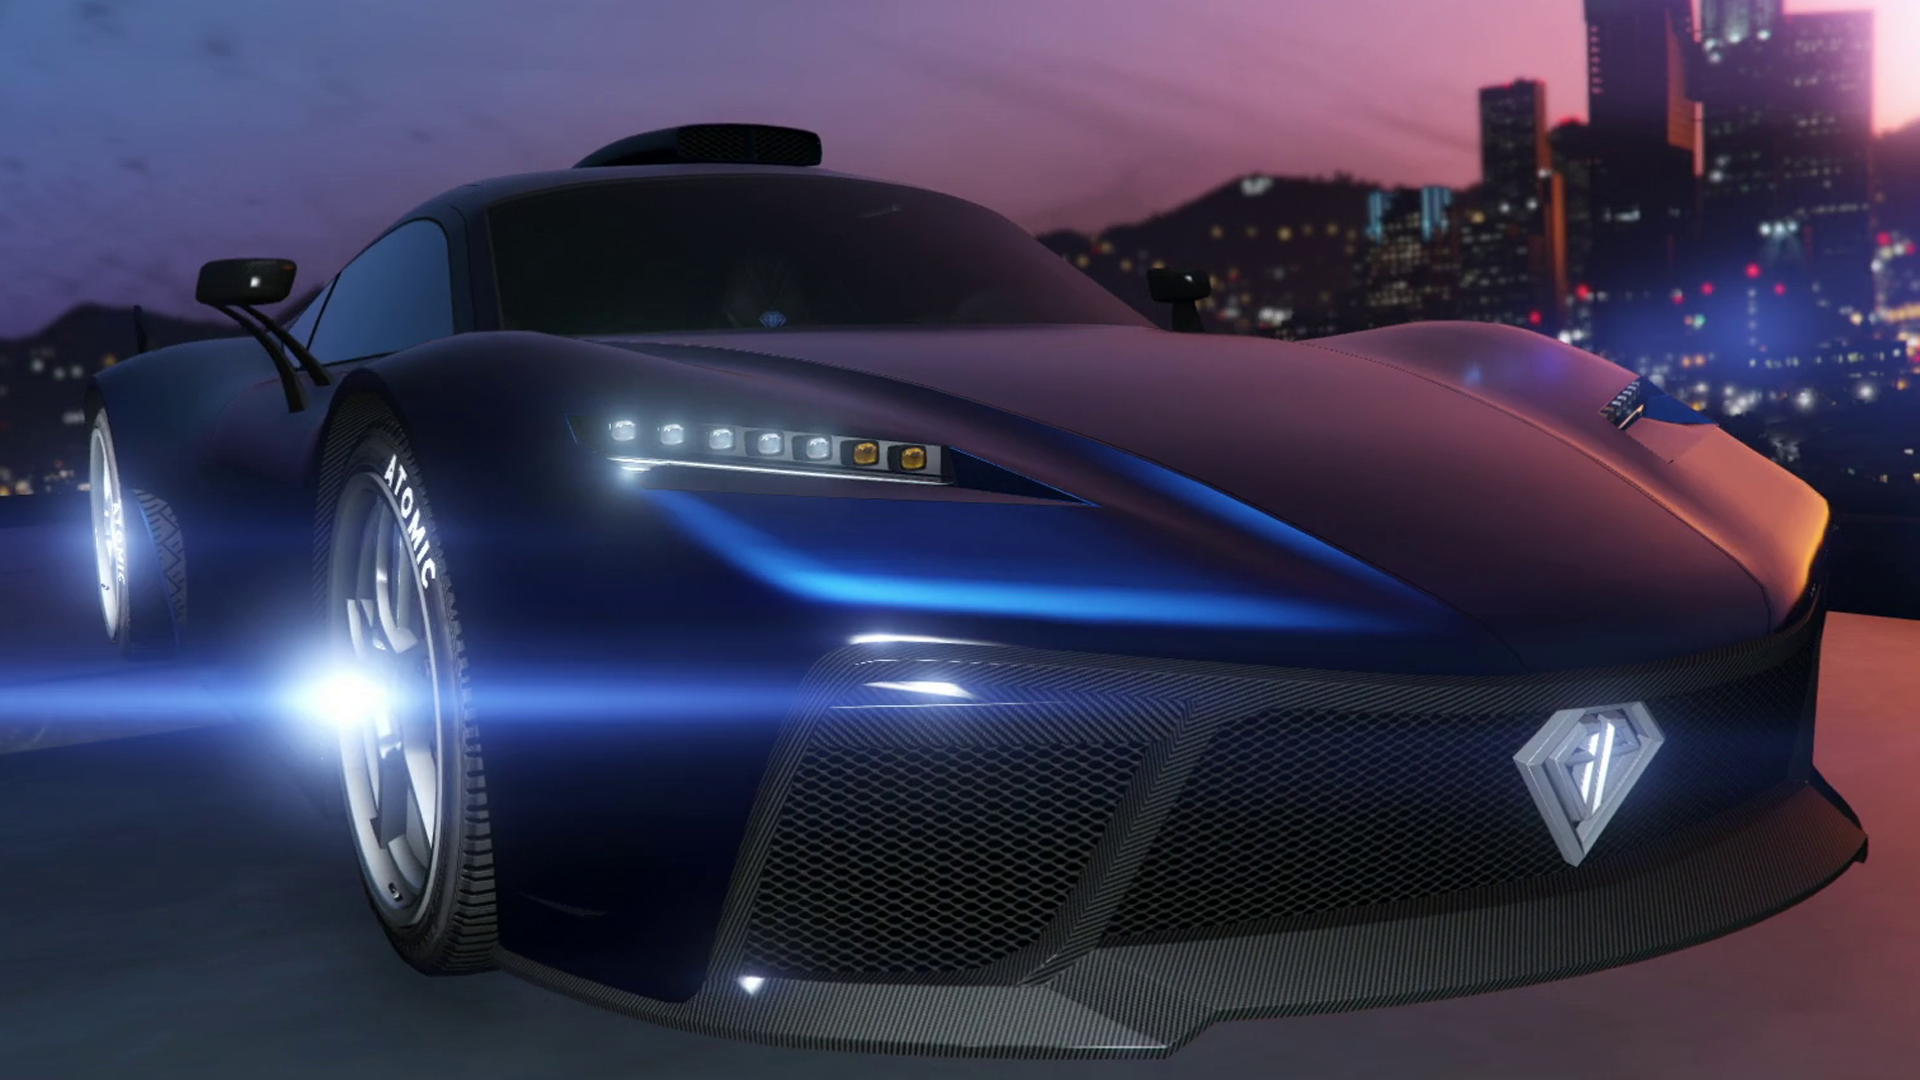 Other Things You Could Buy With The $2.875 Million It Costs To Get The Newest GTA Online Car